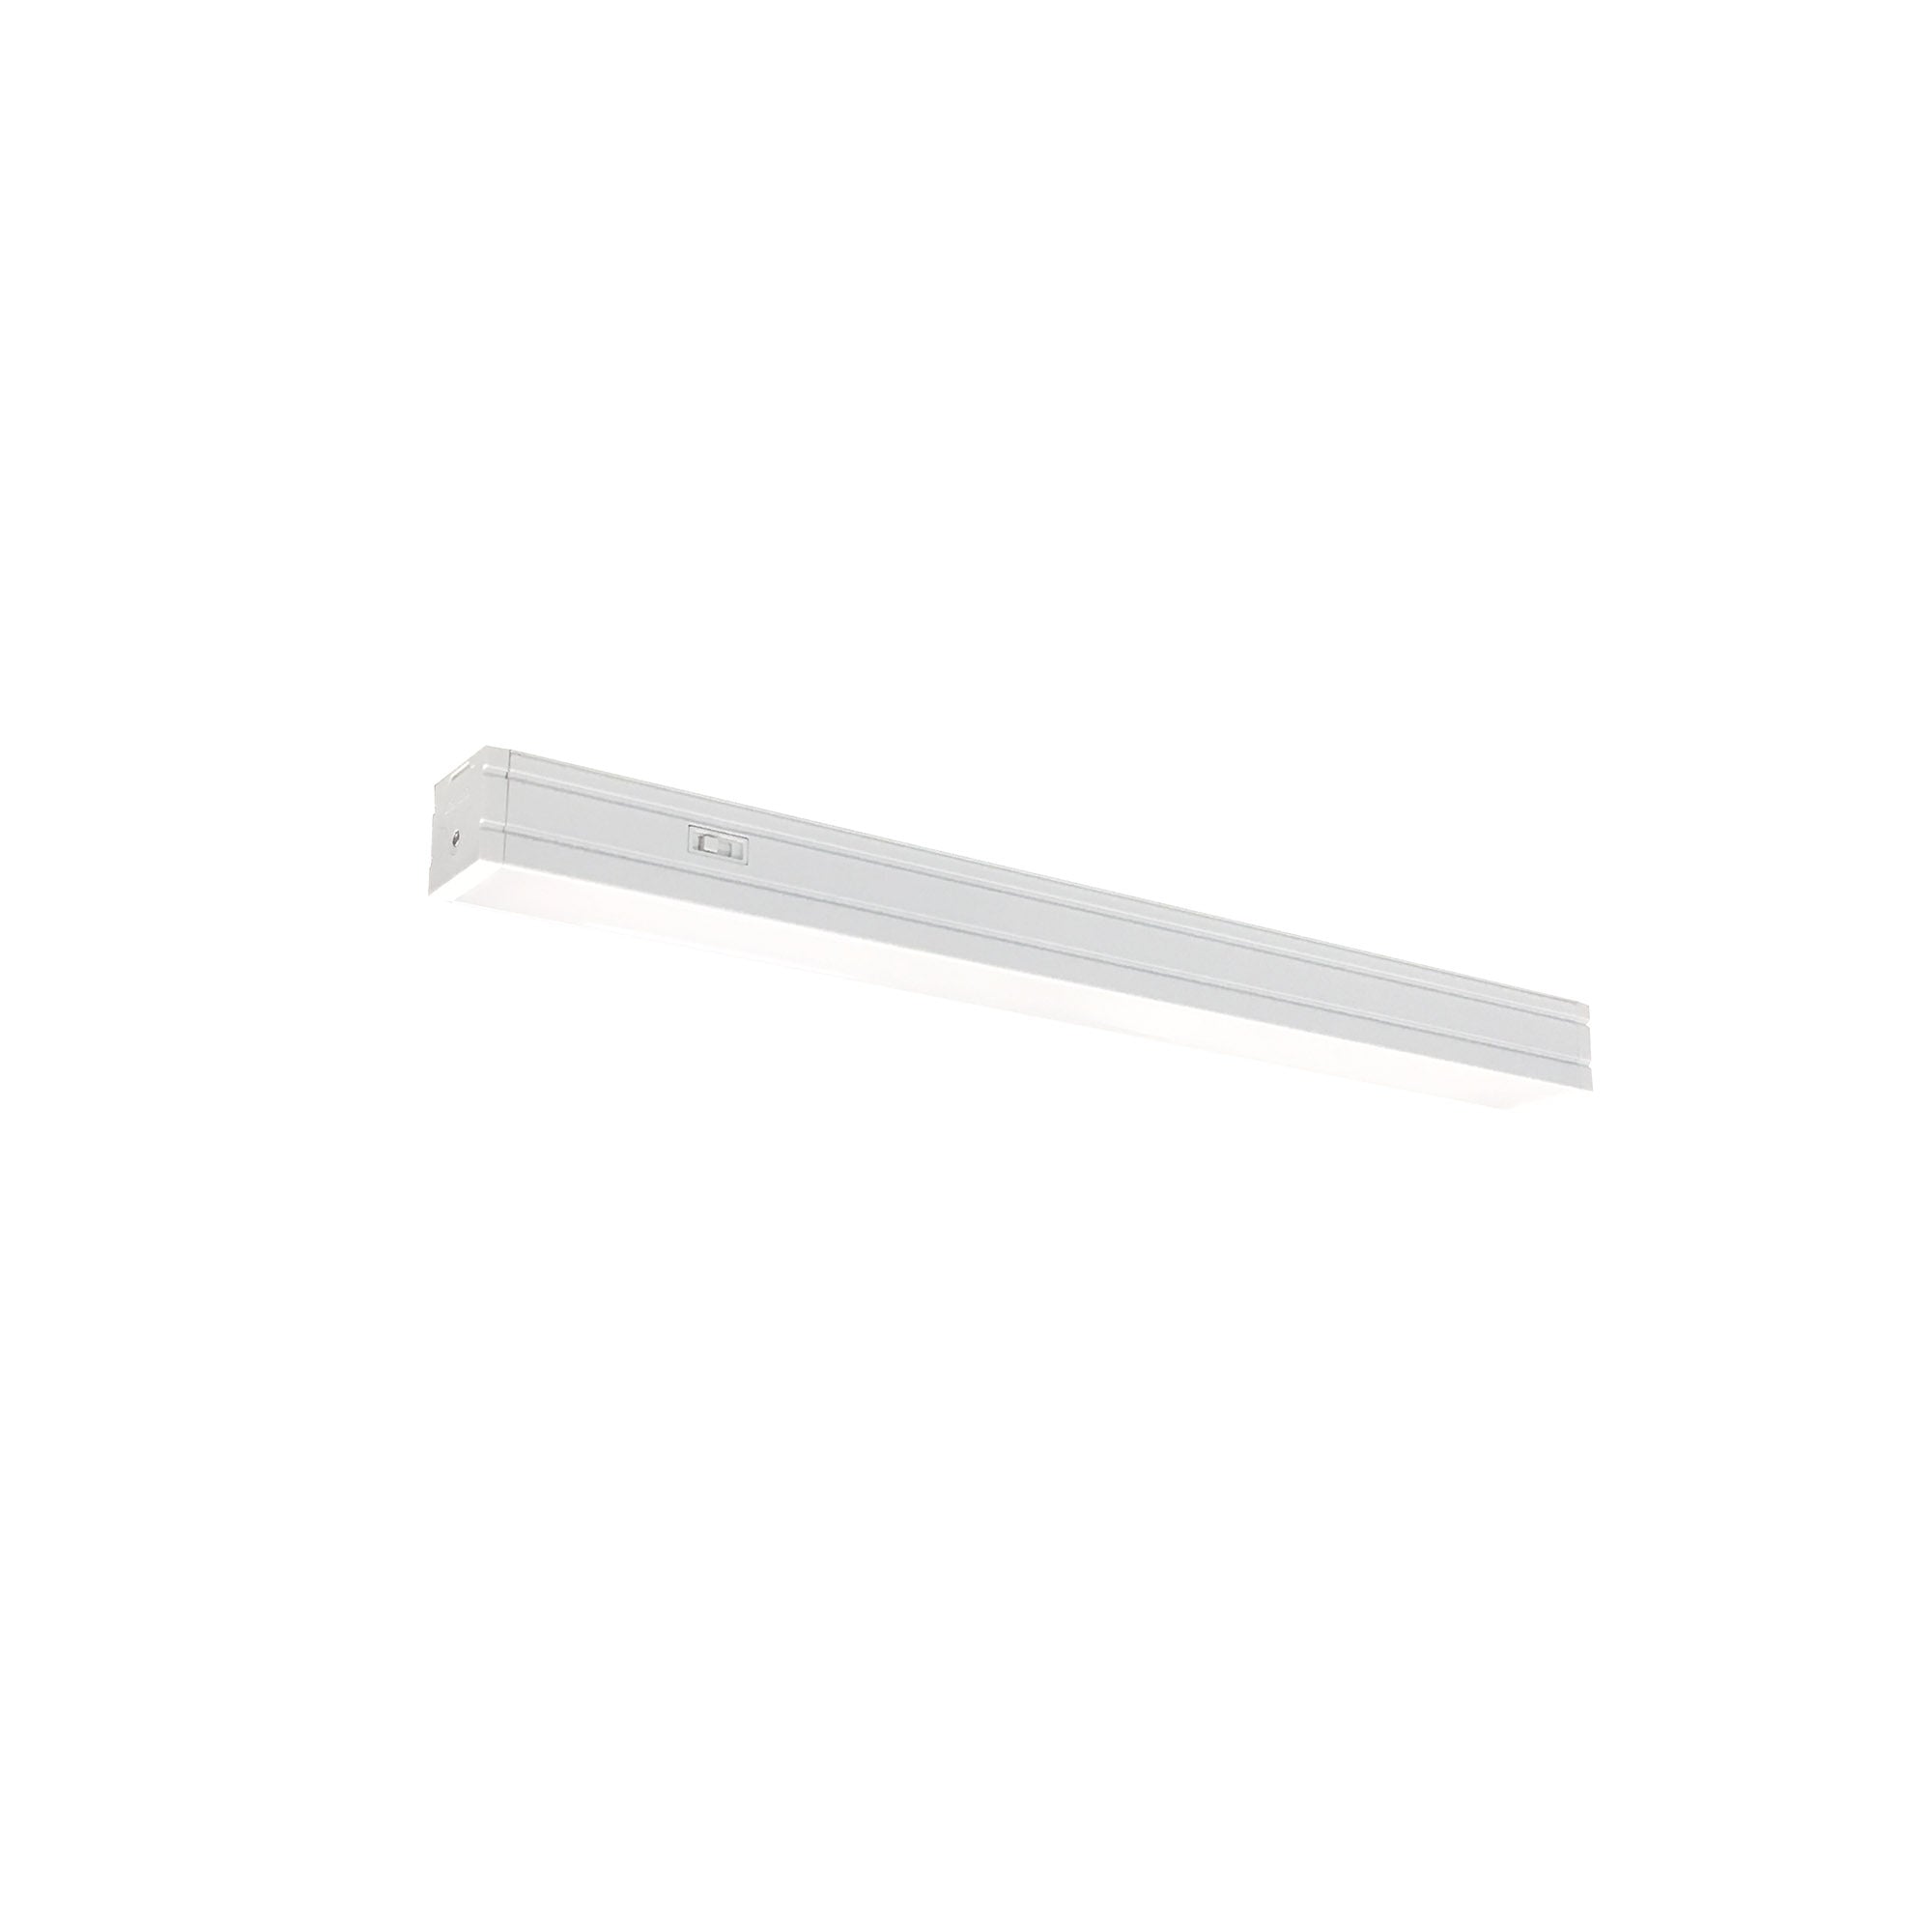 Nora Lighting NUDTW-9824/W - Accent / Undercabinet - 24 Inch Bravo FROST Tunable White LED Linear, 3000/3500/4000K, White